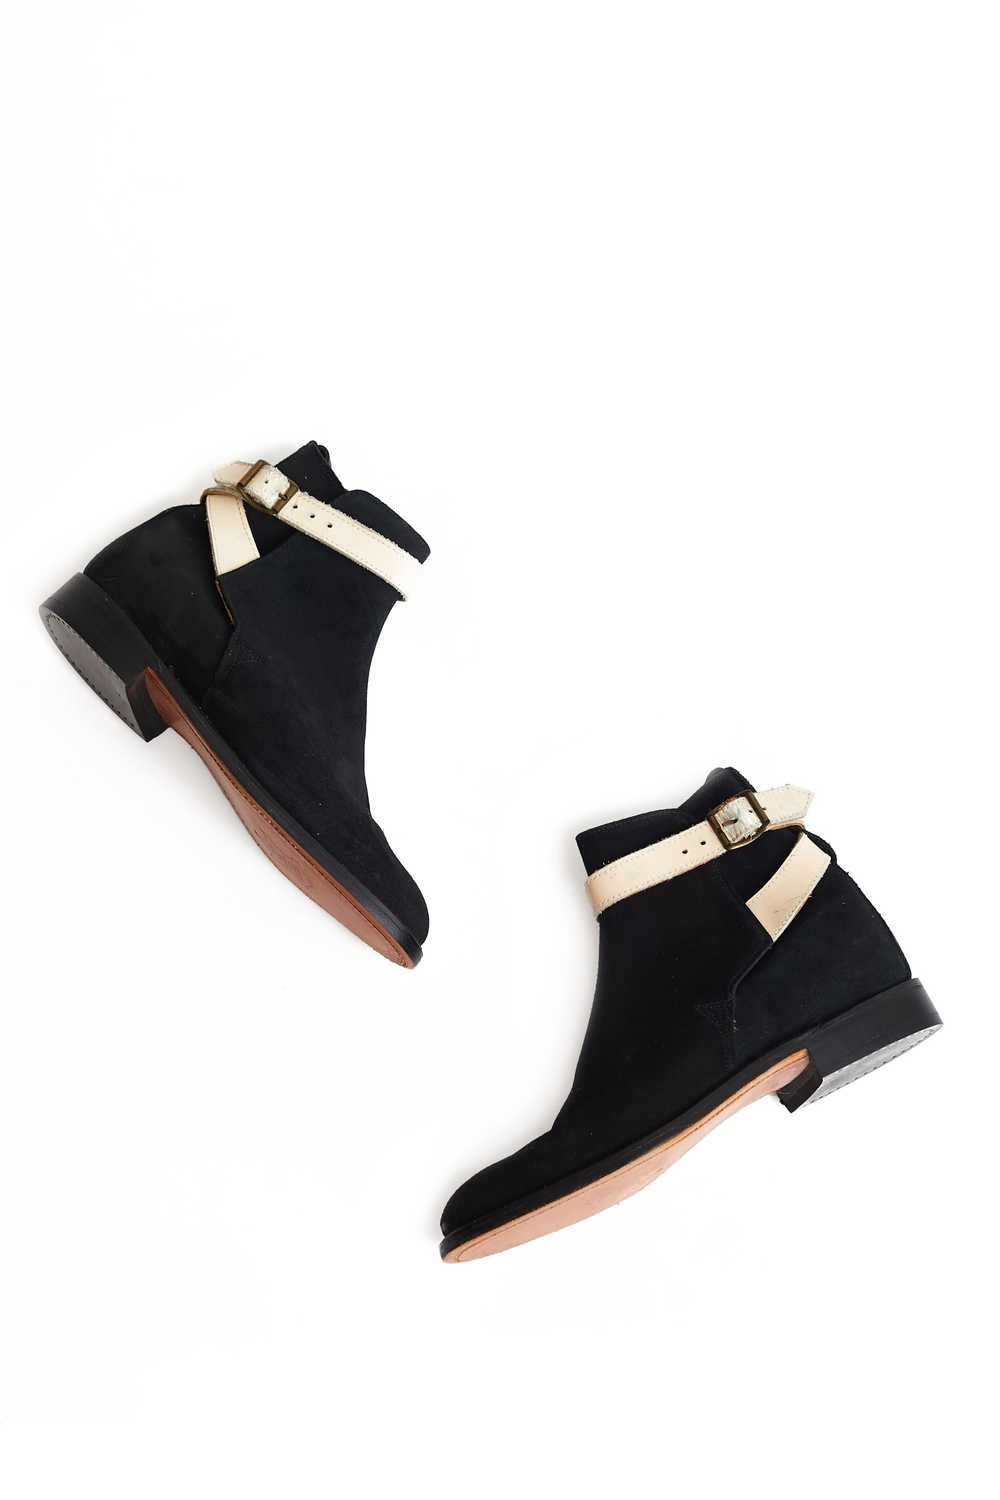 Vivienne Westwood 70's Sex suede Pirate boots - image 1